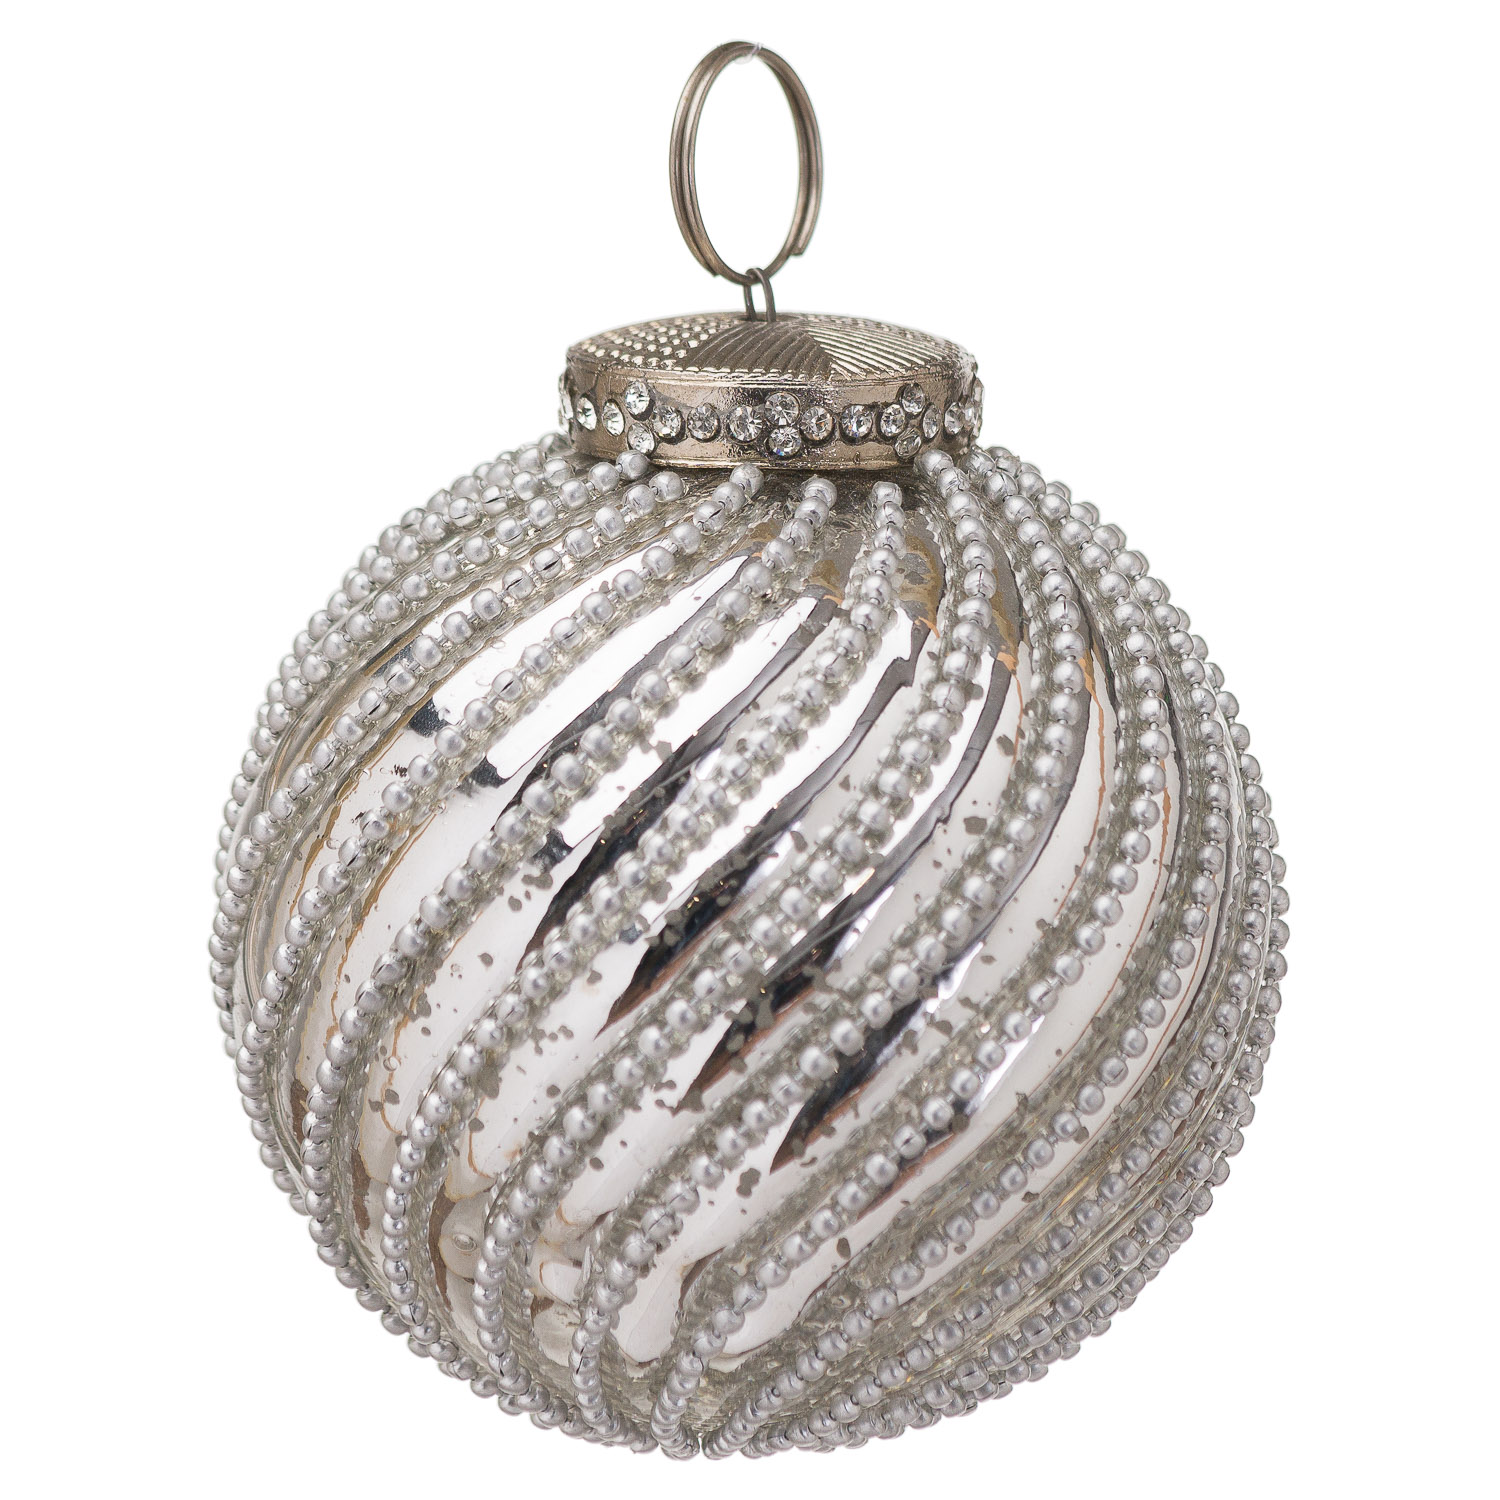 Victoria & Co. Large Silver Swirl Christmas Bauble